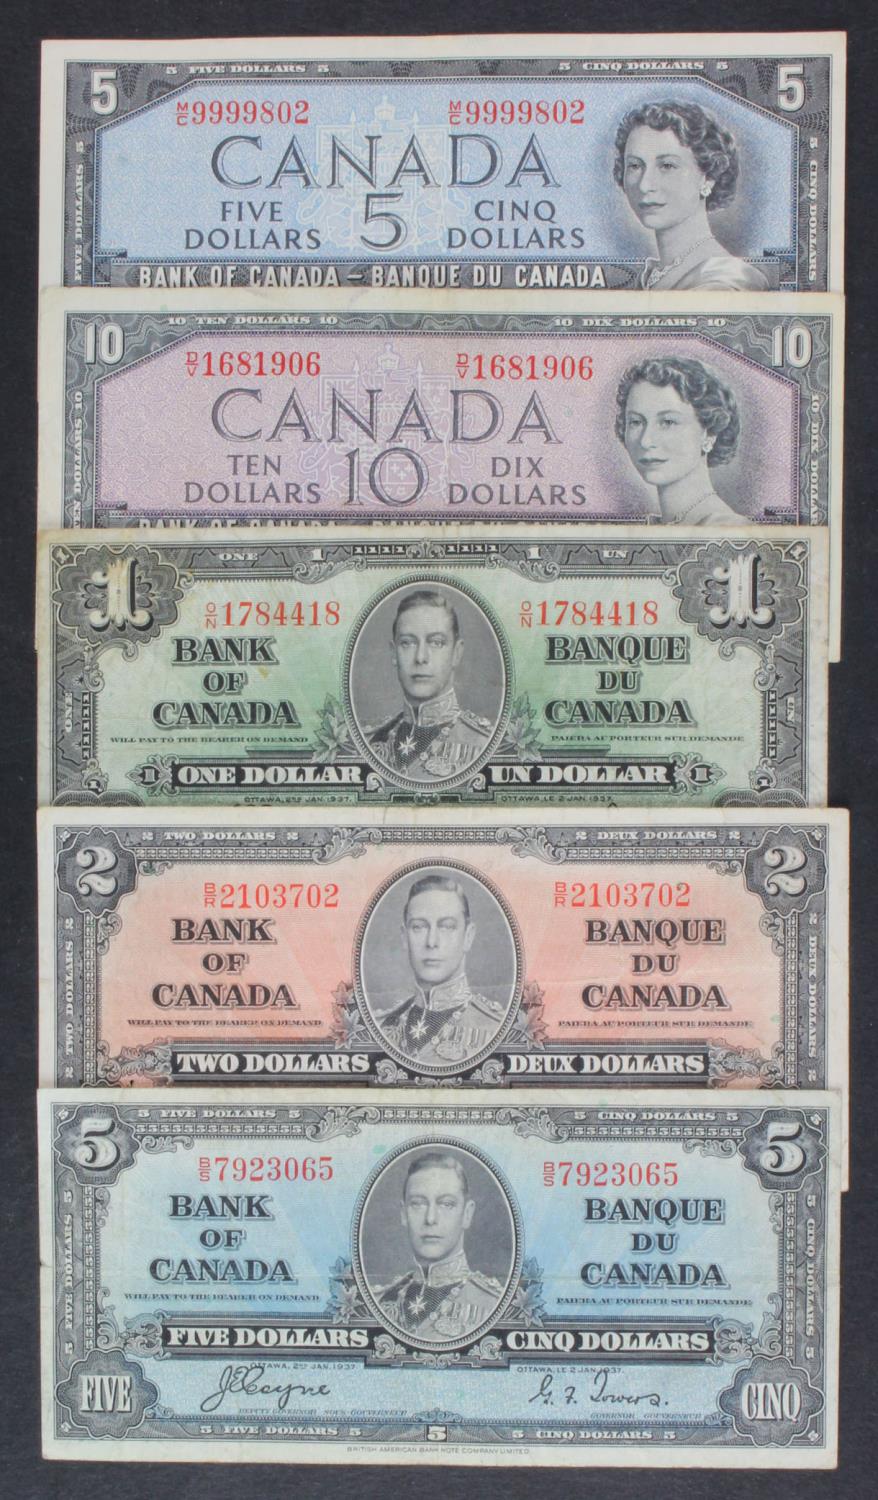 Canada (5), 10 Dollars, 5 Dollars and 1 Dollar dated 1937, King George VI portrait, 10 Dollars and 5